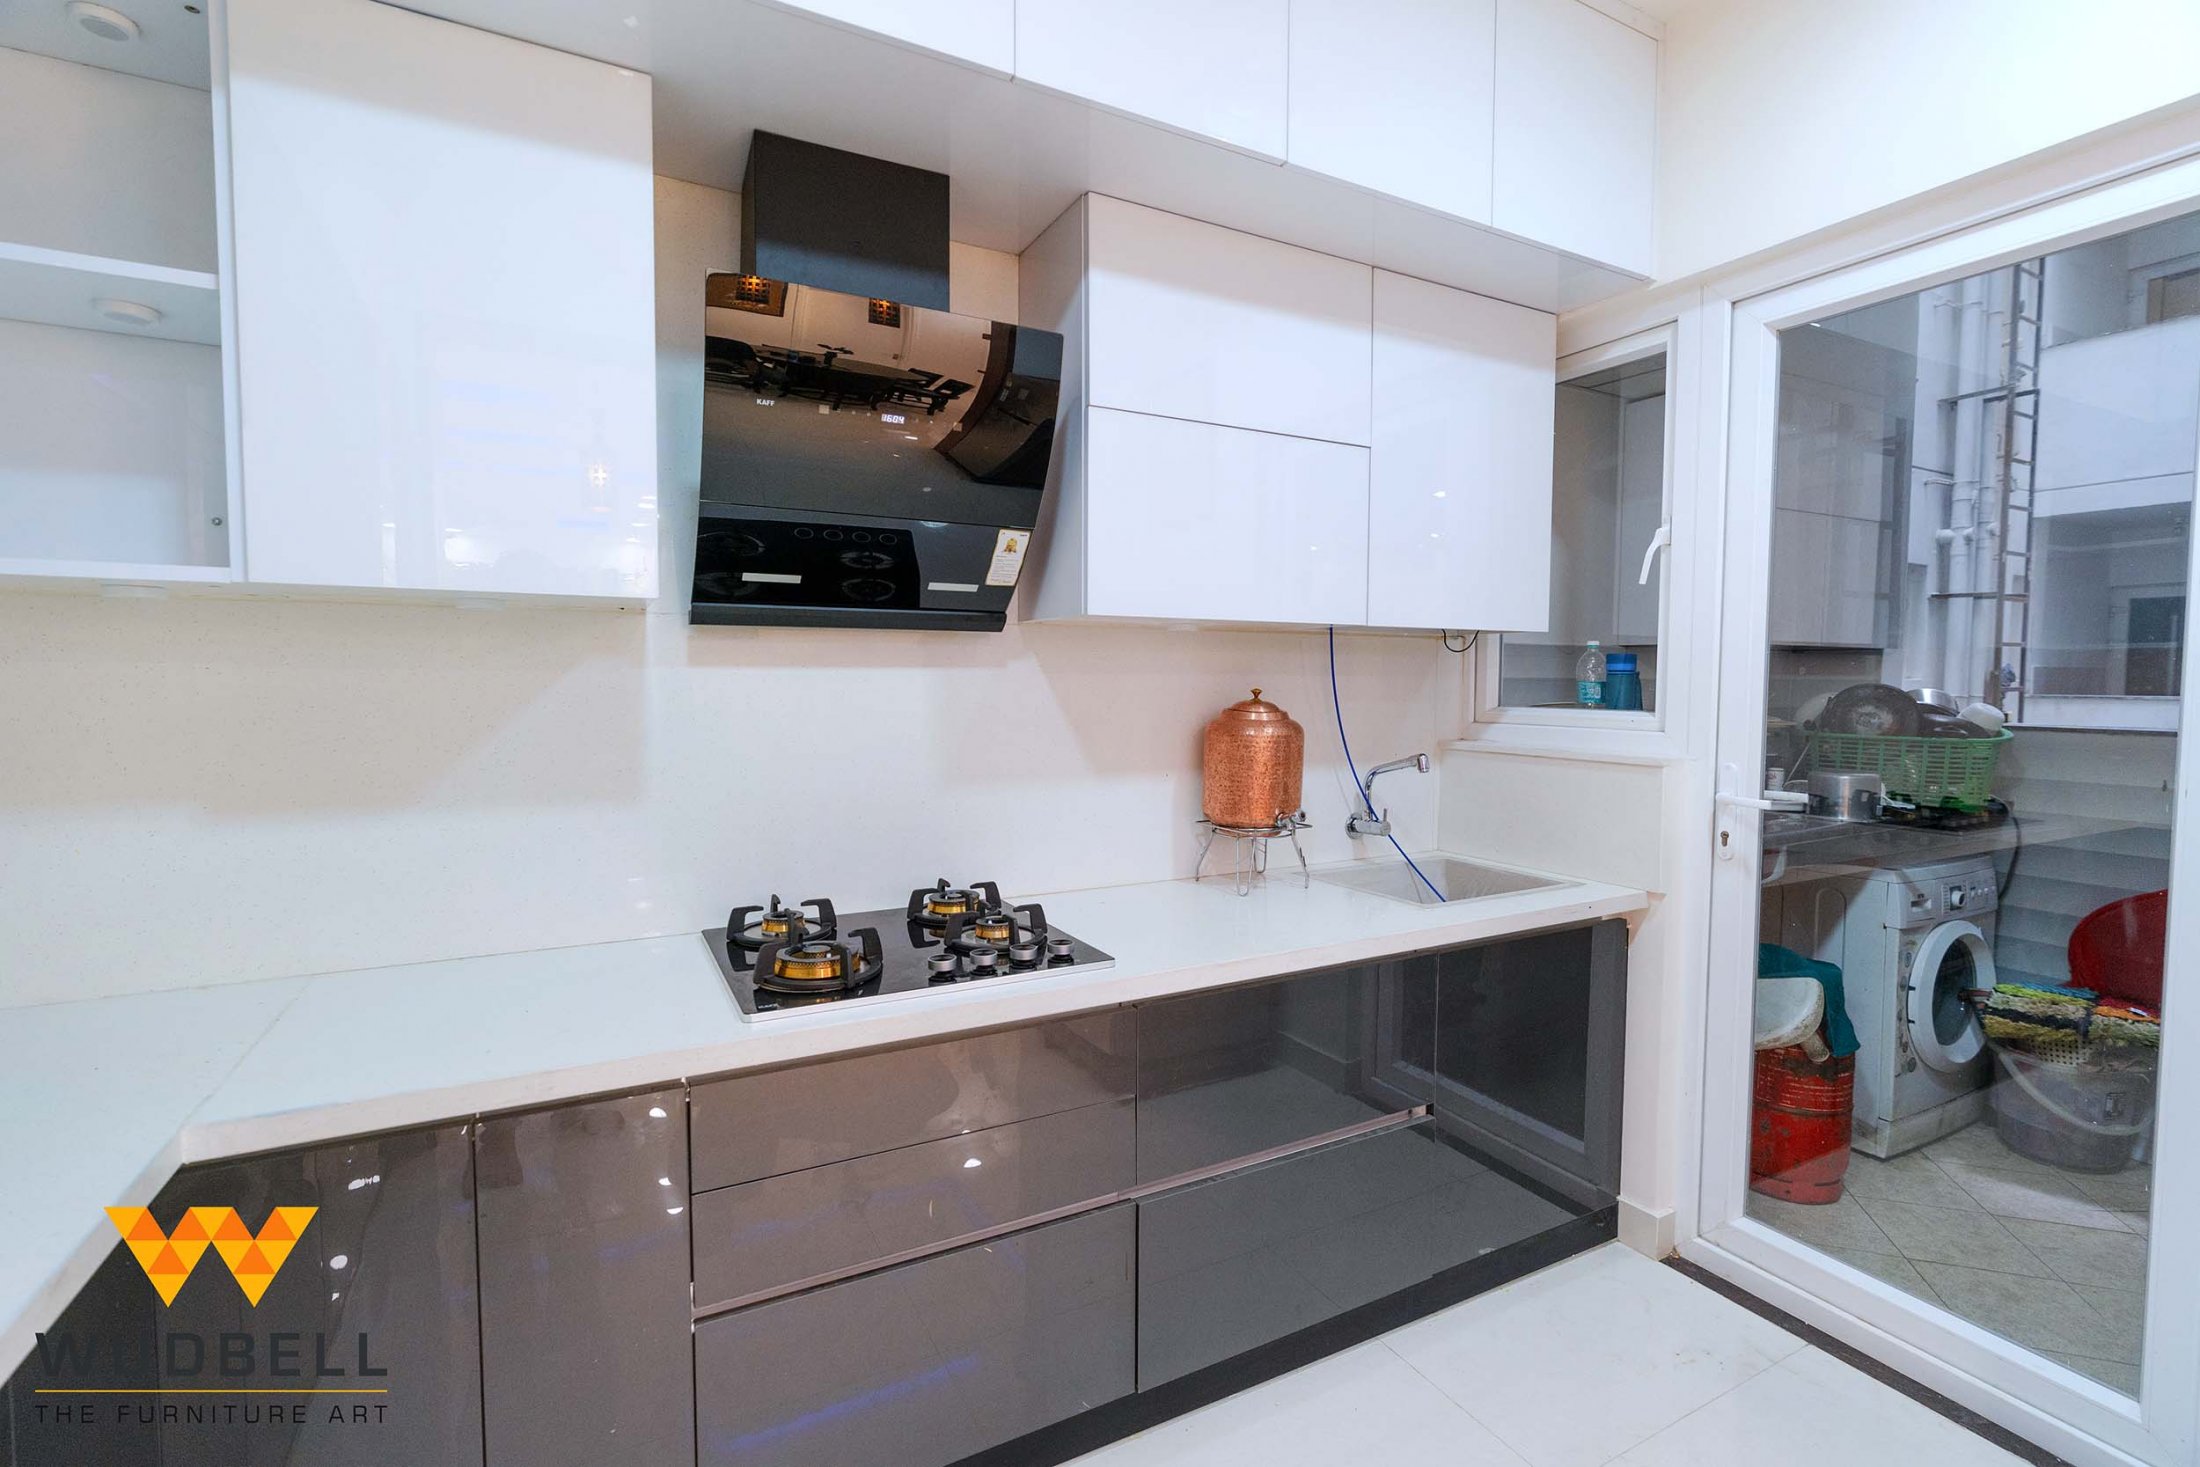 Highly efficient and functional minimalist kitchen units